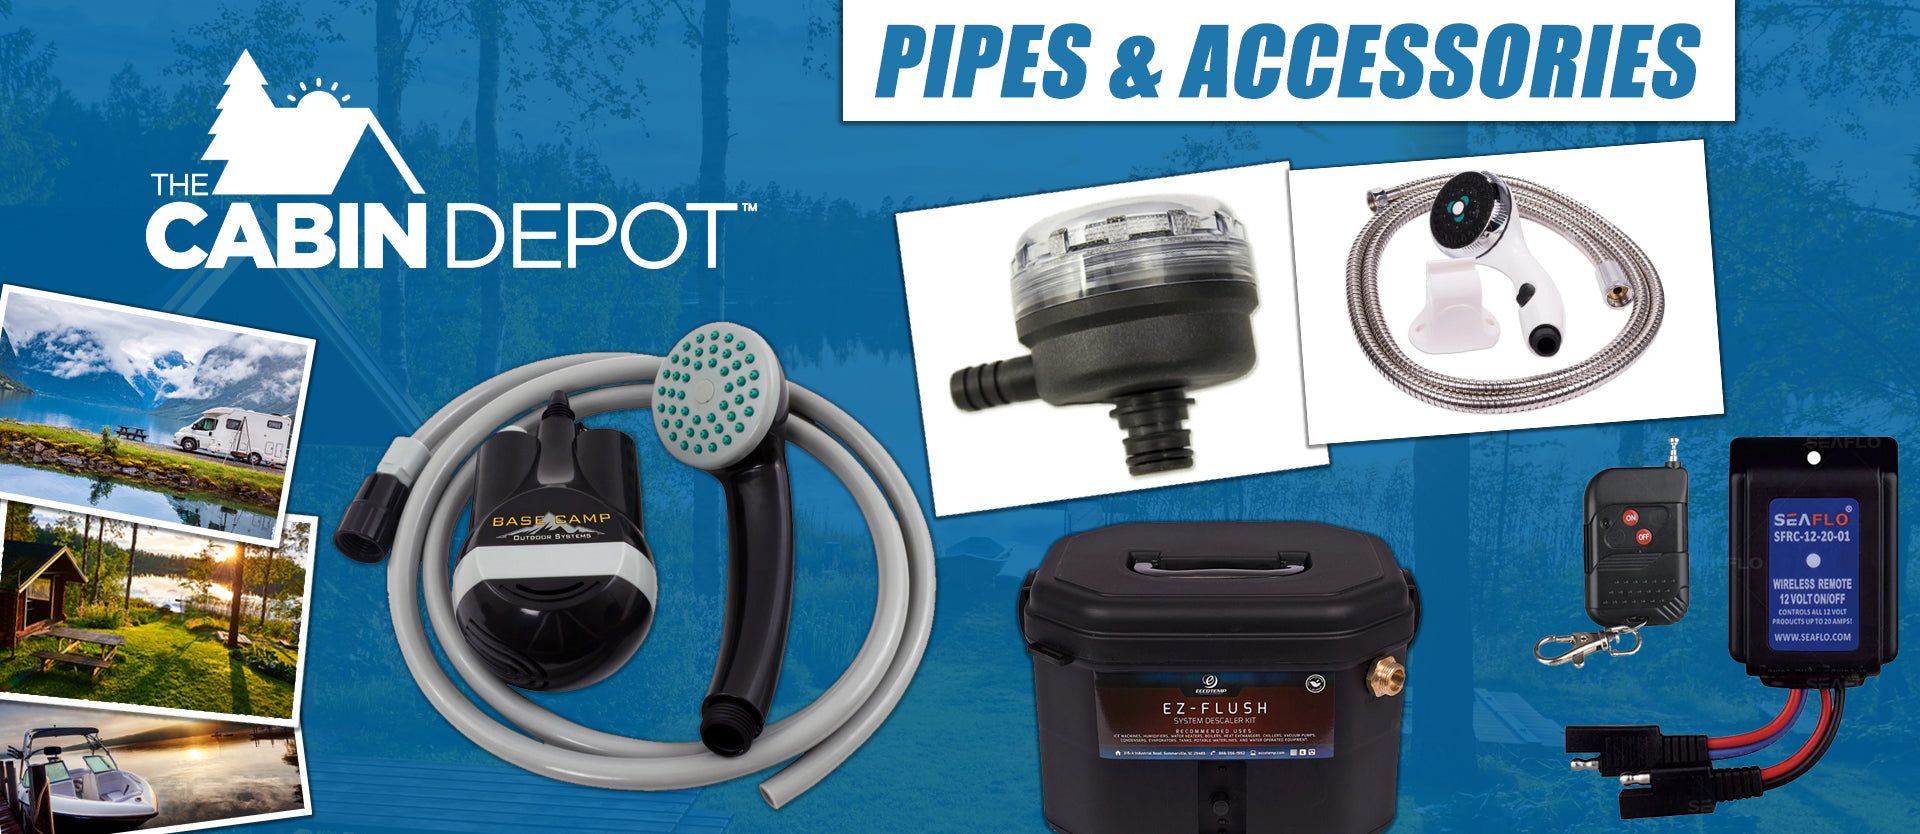 Pipes & Accessories The Cabin Depot ™ Canada